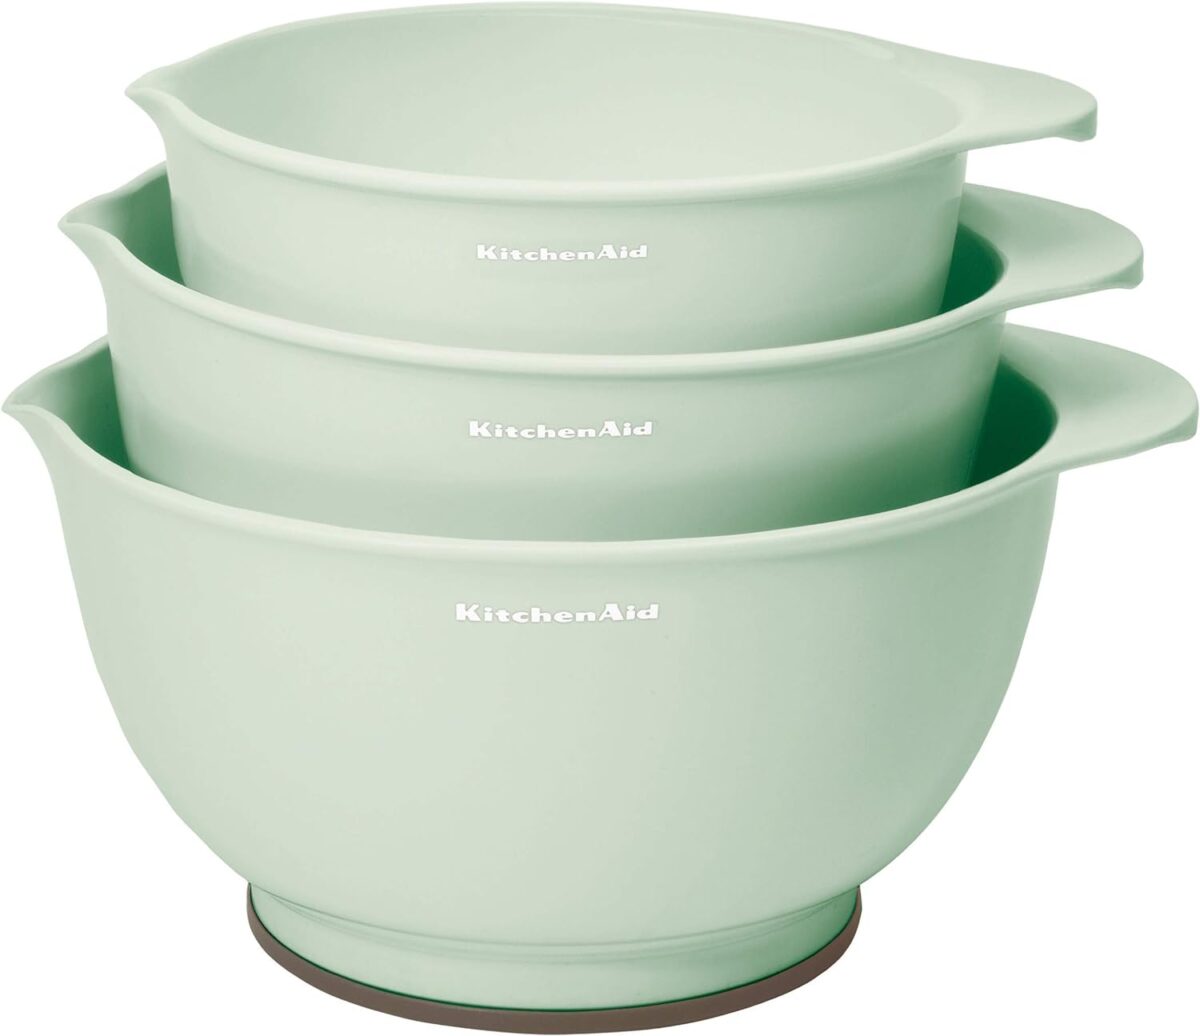 Kitchenaid mixing bowl set in mint green available at discounted prices during Cyber Monday.